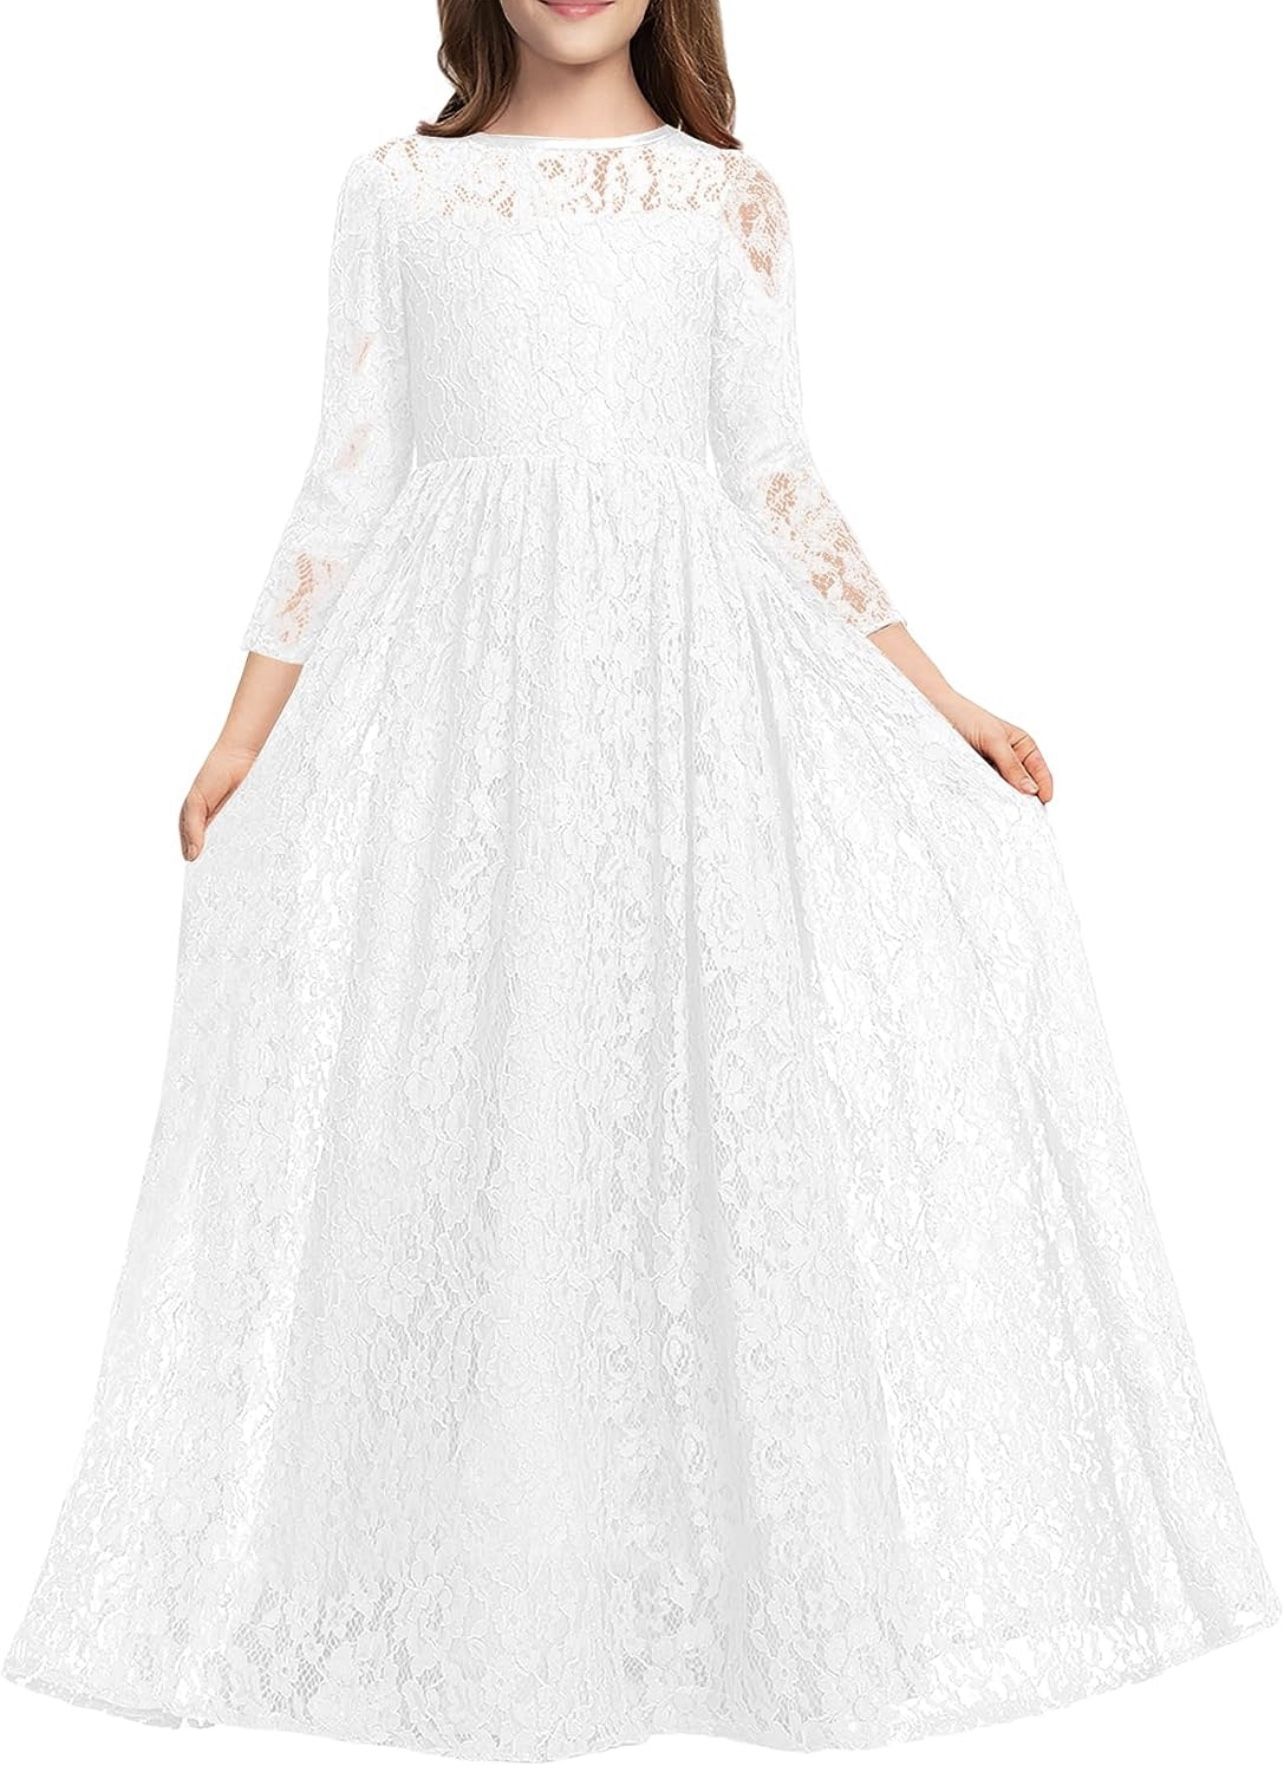 Girls Vintage Lace 3/4 Sleeve Boho Wedding Party Flower Girls Maxi Junior Bridesmaid Dress for 10 Years